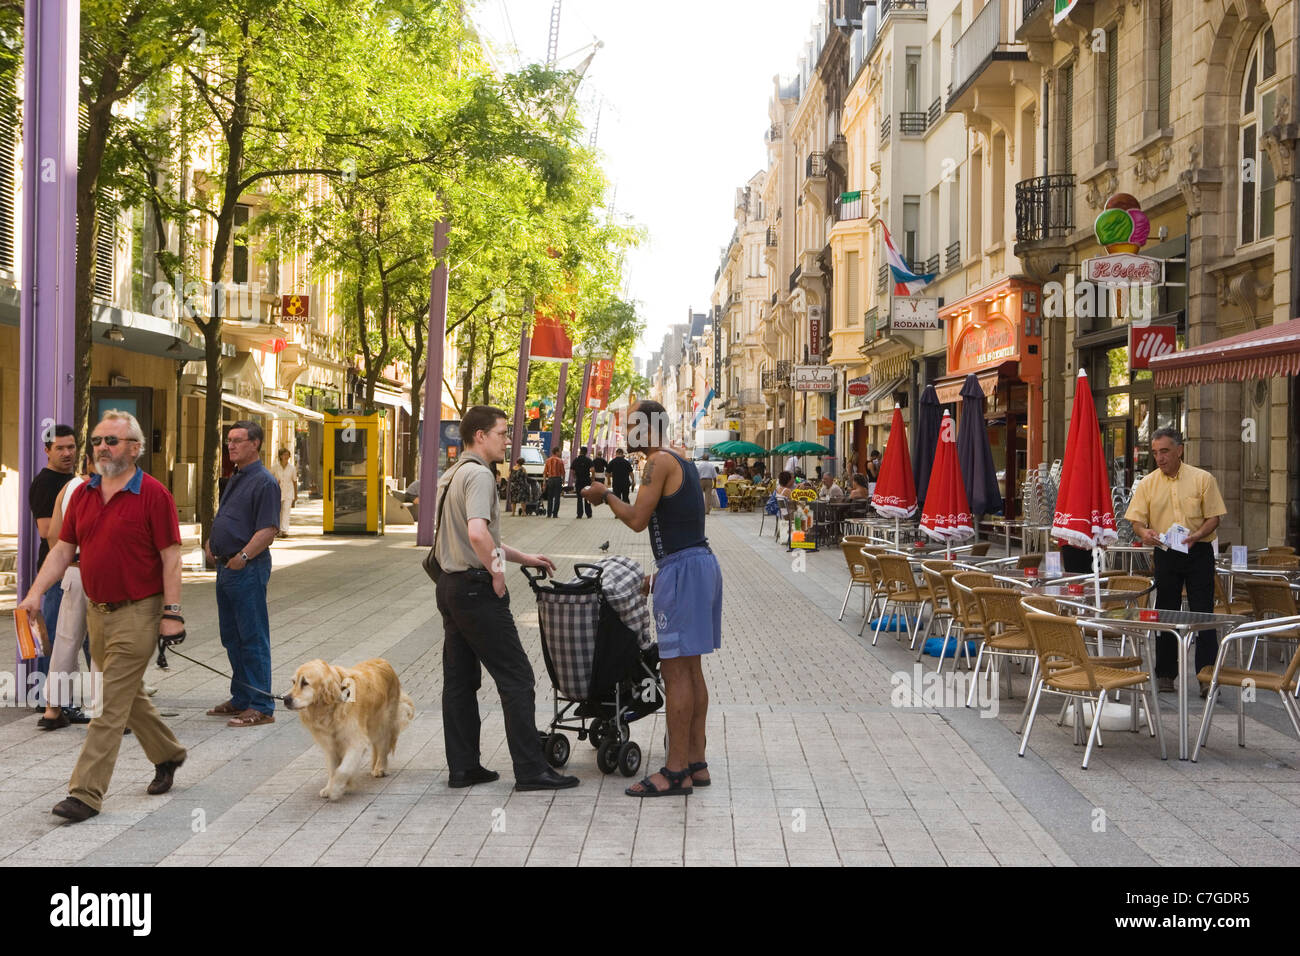 Luxembourg Country. The main shopping street Rue de l'Alzette in Esch Alzette. Stock Photo